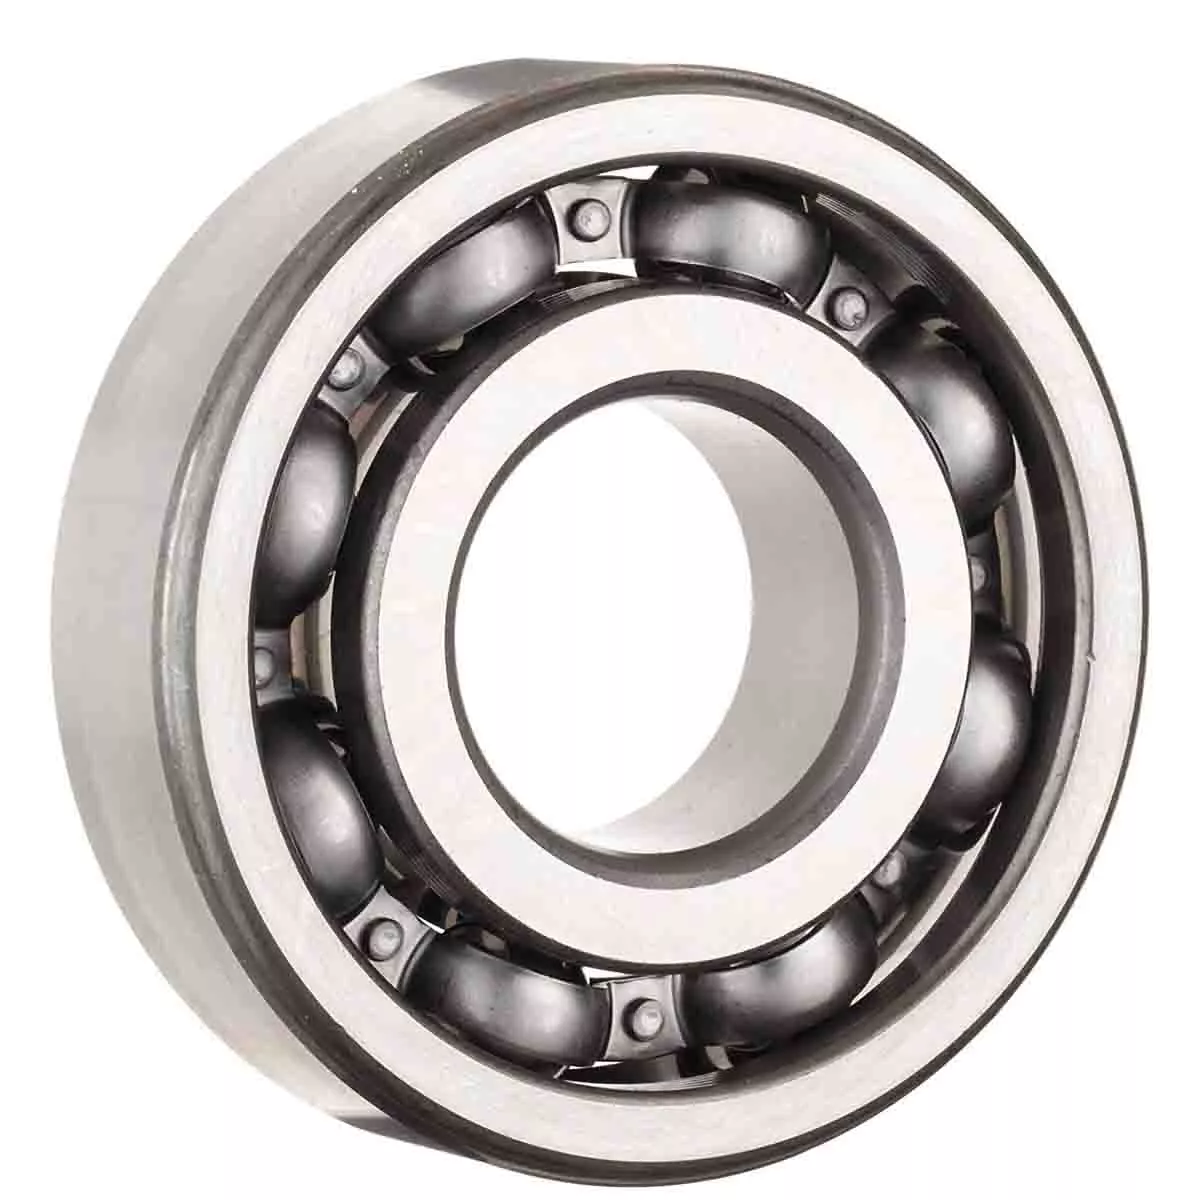 difference between ball roller bearings 3 - تفاوت بلبرینگ و رولبرینگ